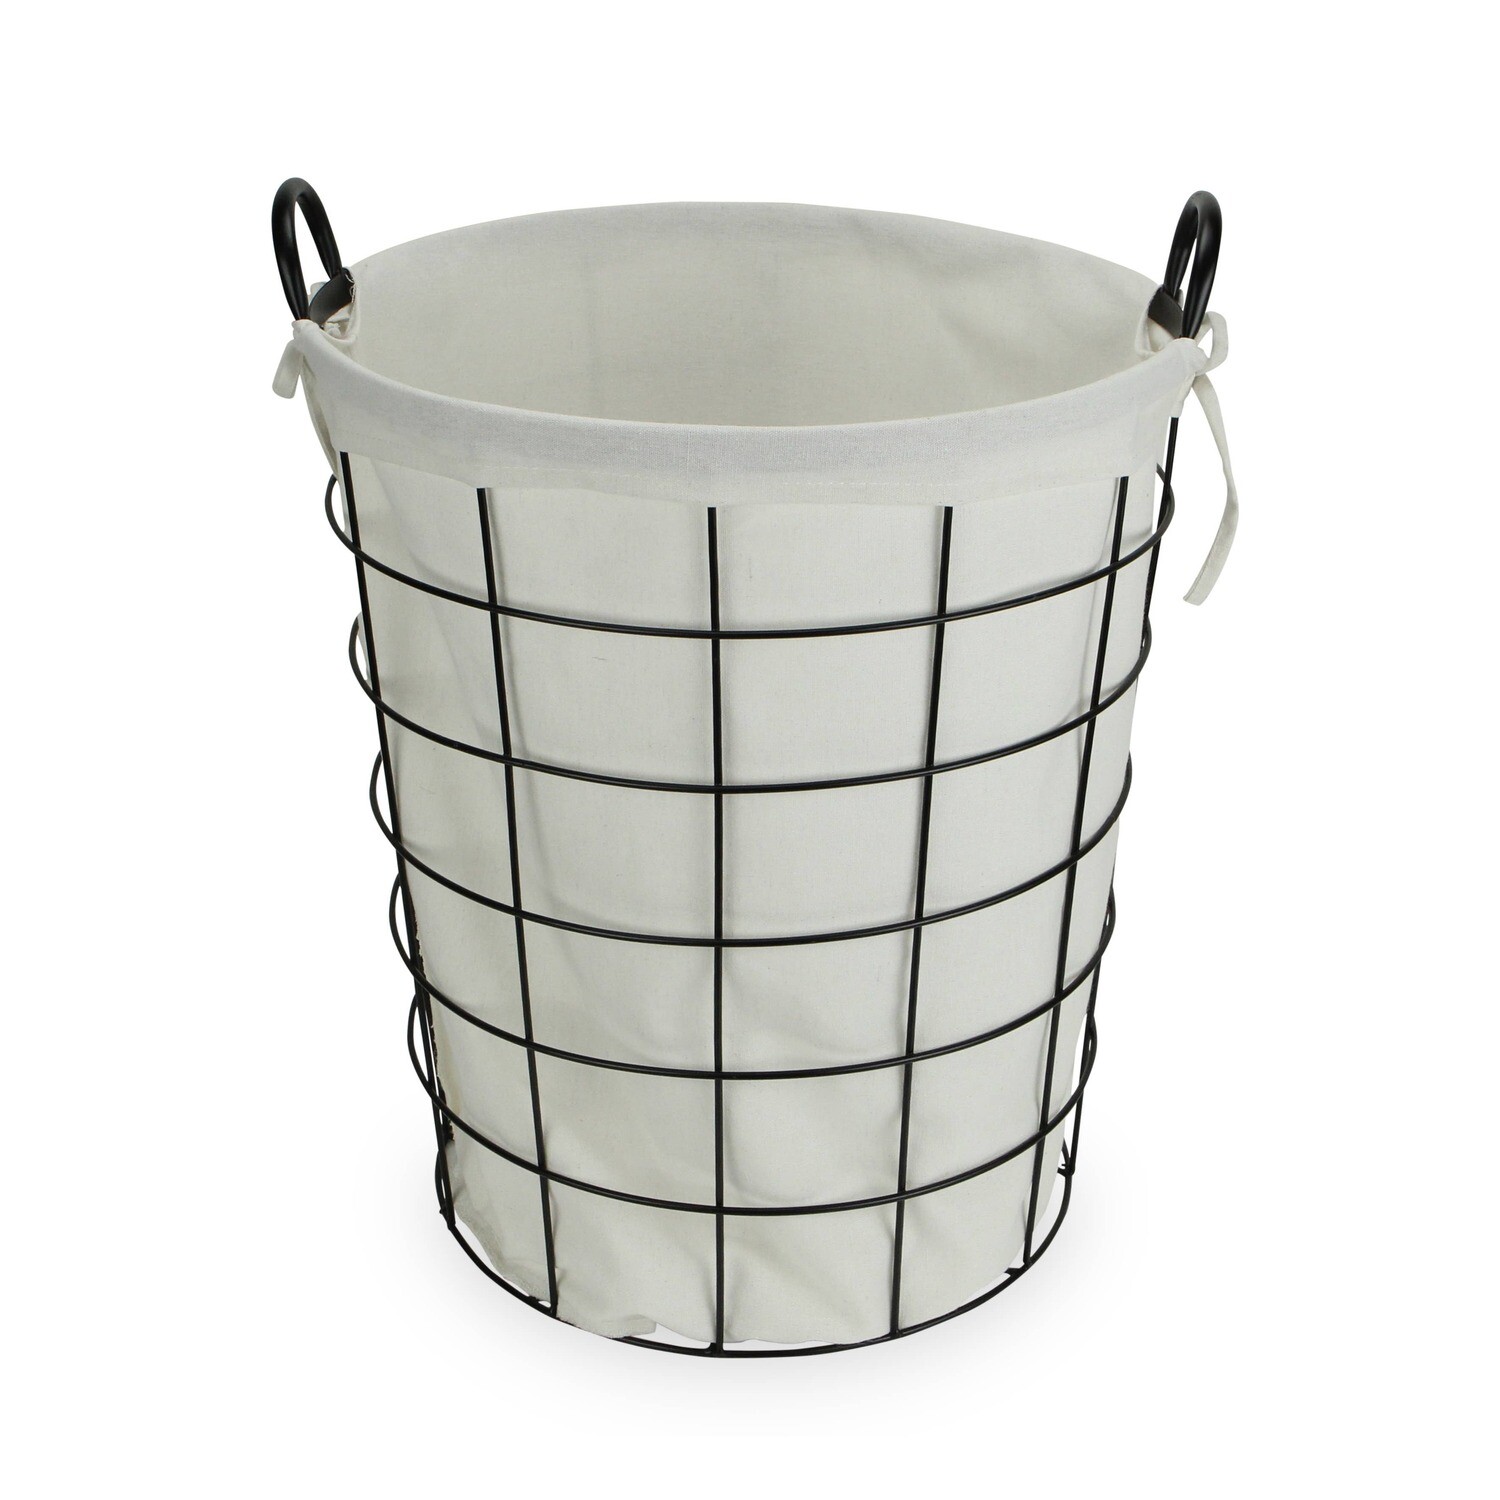 Lined Wire Laundry Basket with handles